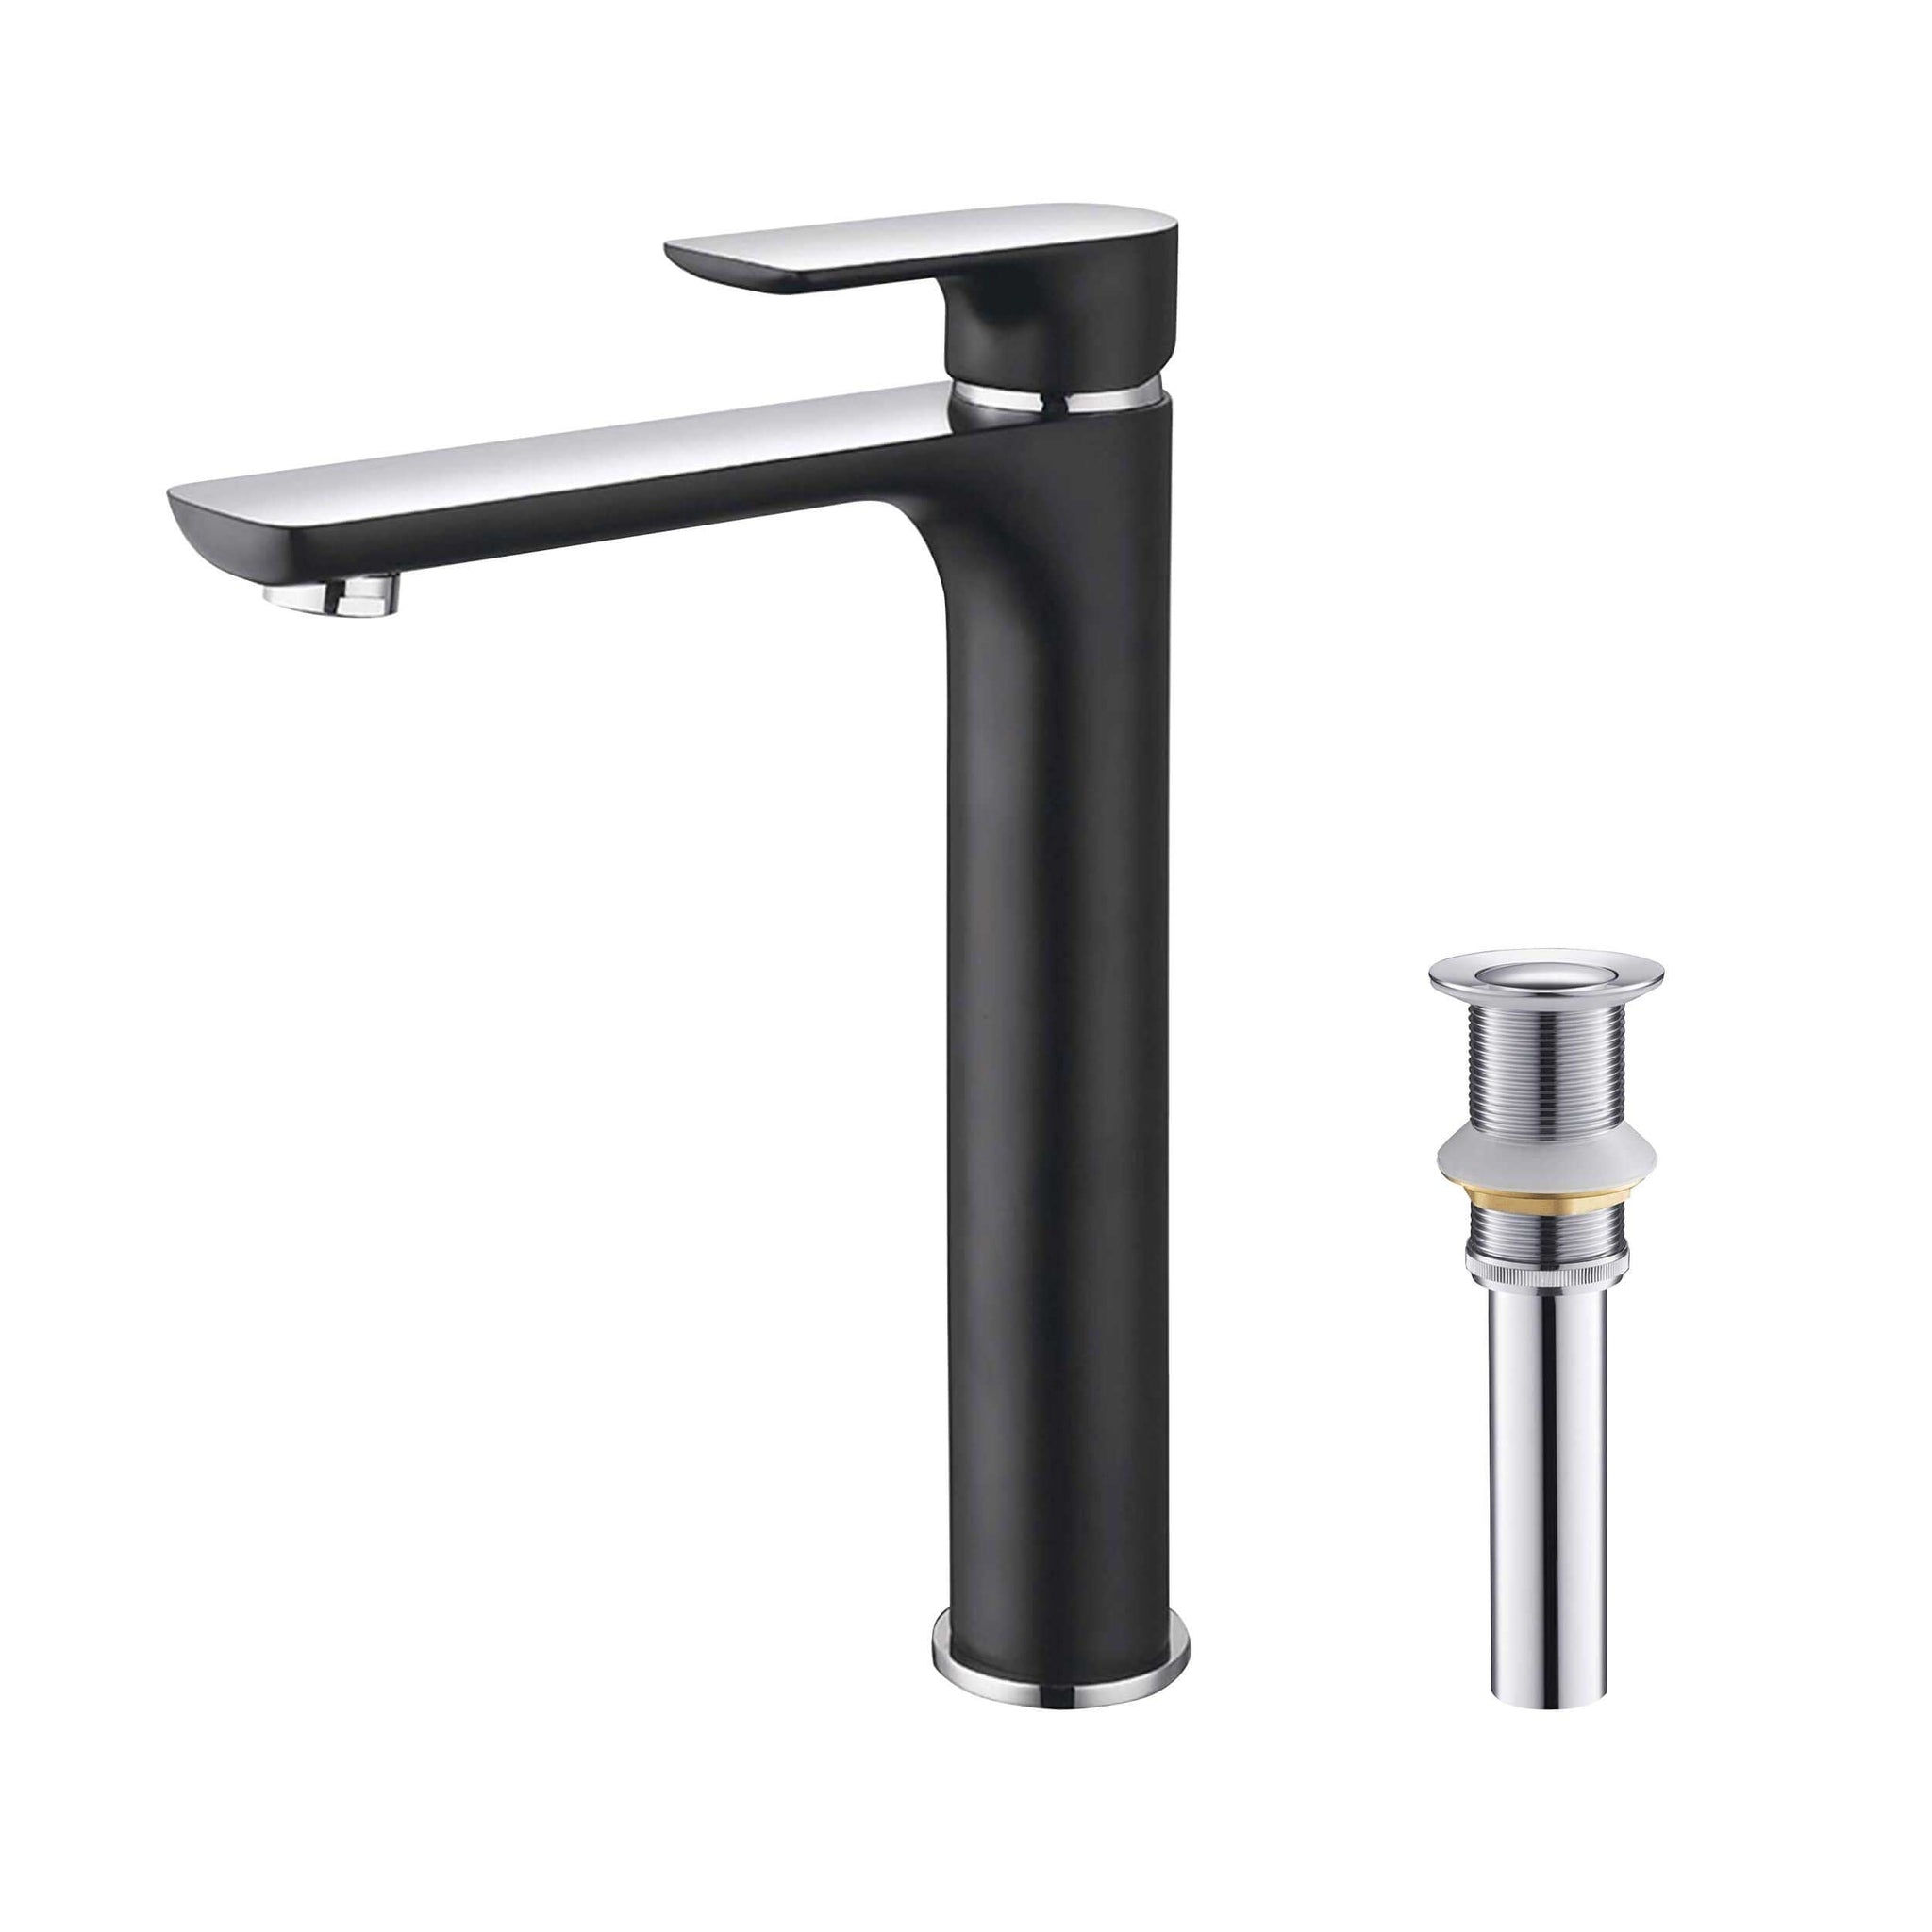 KIBI, KIBI Tender-T Single Handle Black Solid Brass Bathroom Vessel Sink Faucet With Chrome  Pop-Up Drain Stopper Small Cover Without Overflow